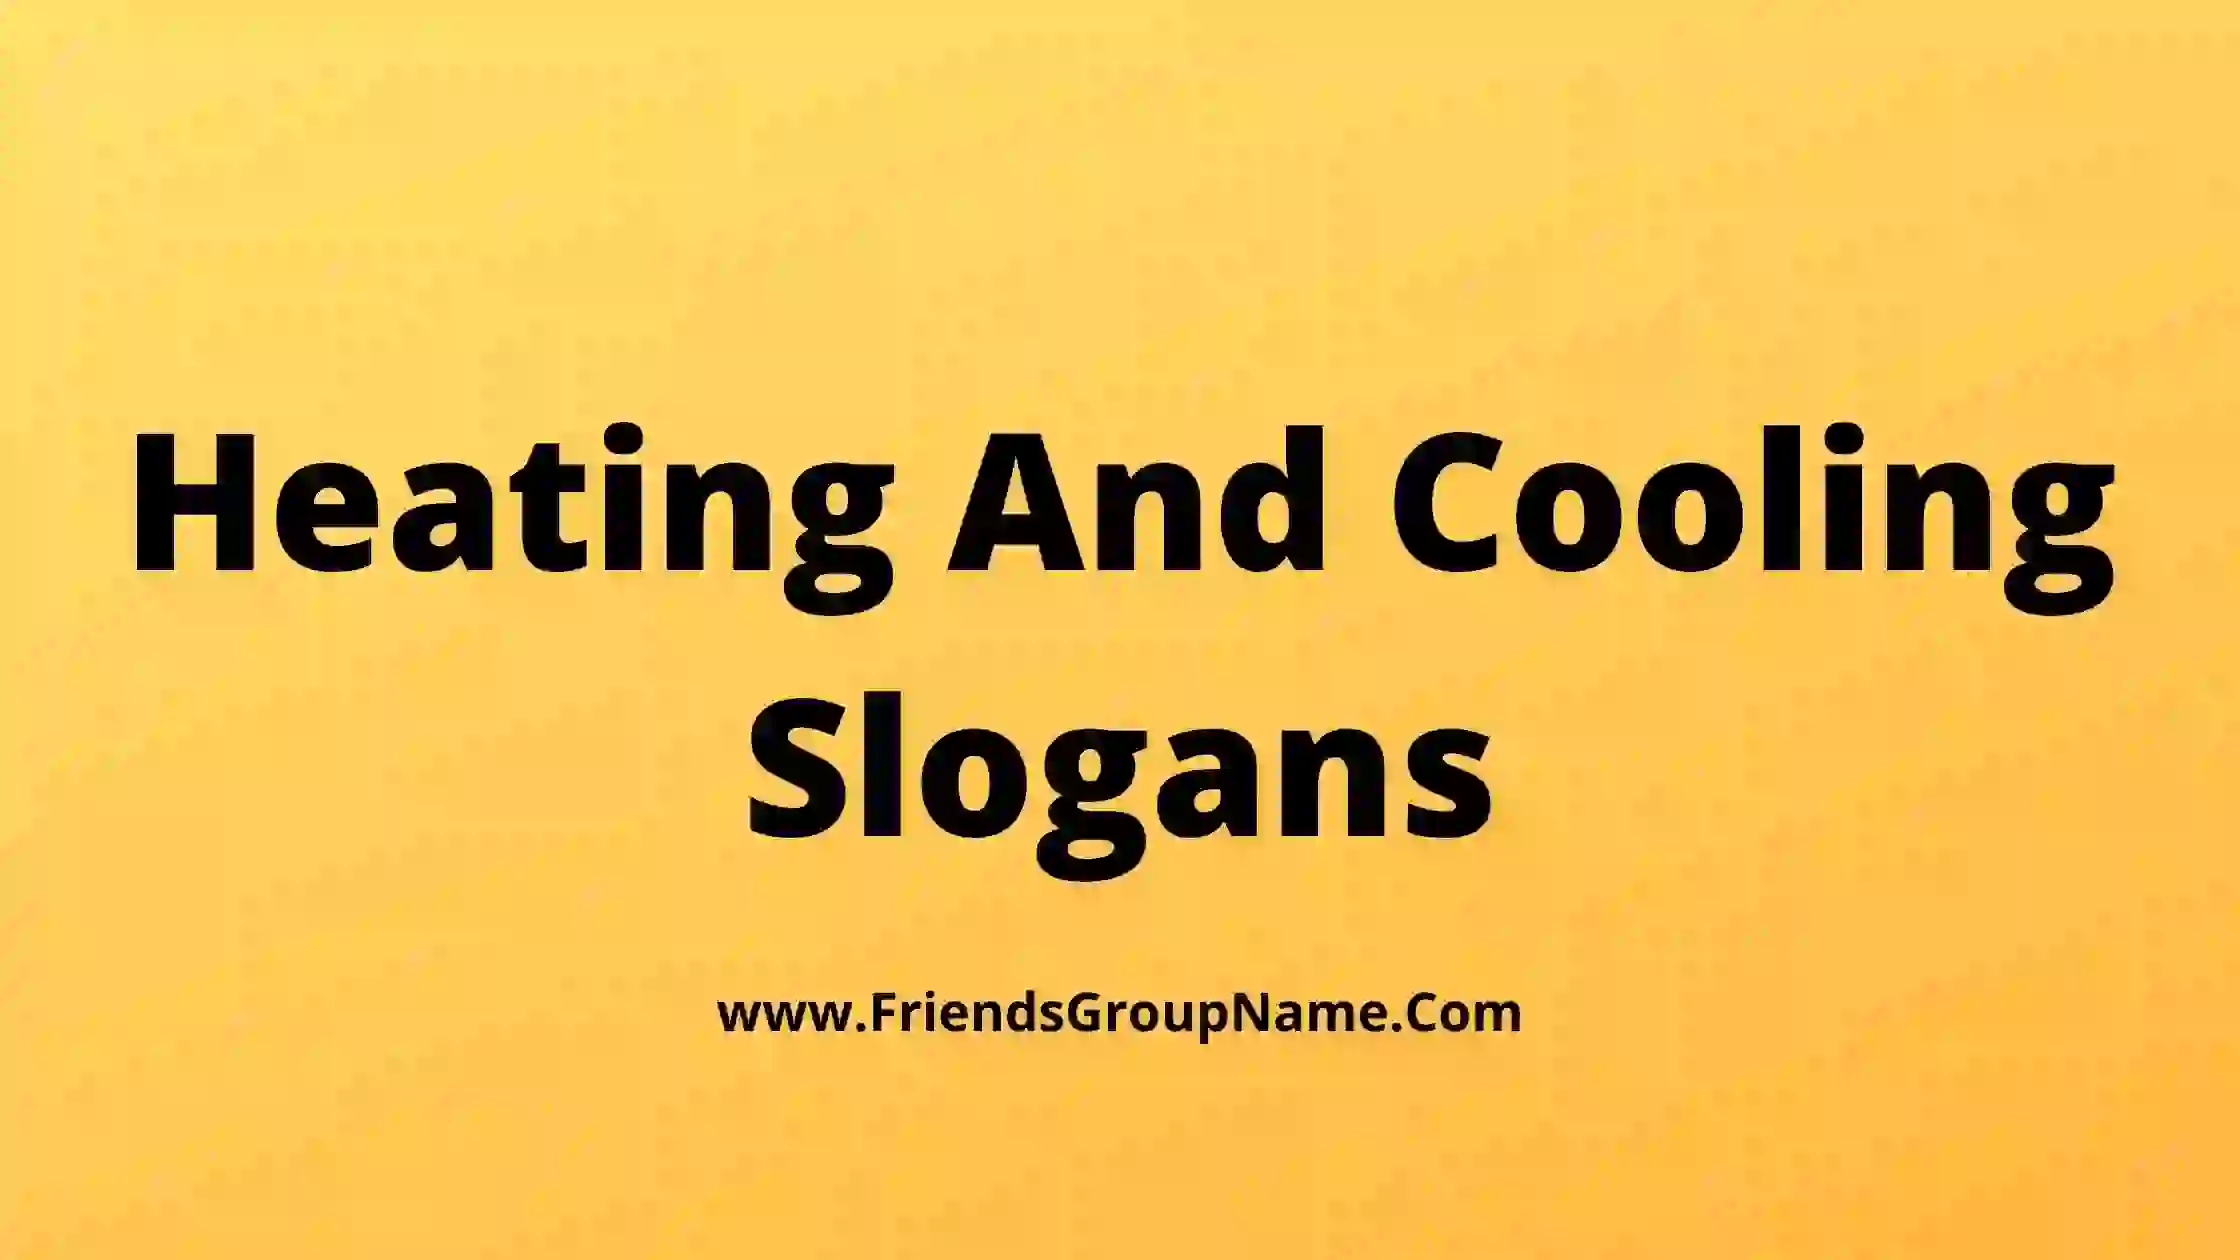 Heating And Cooling Slogans